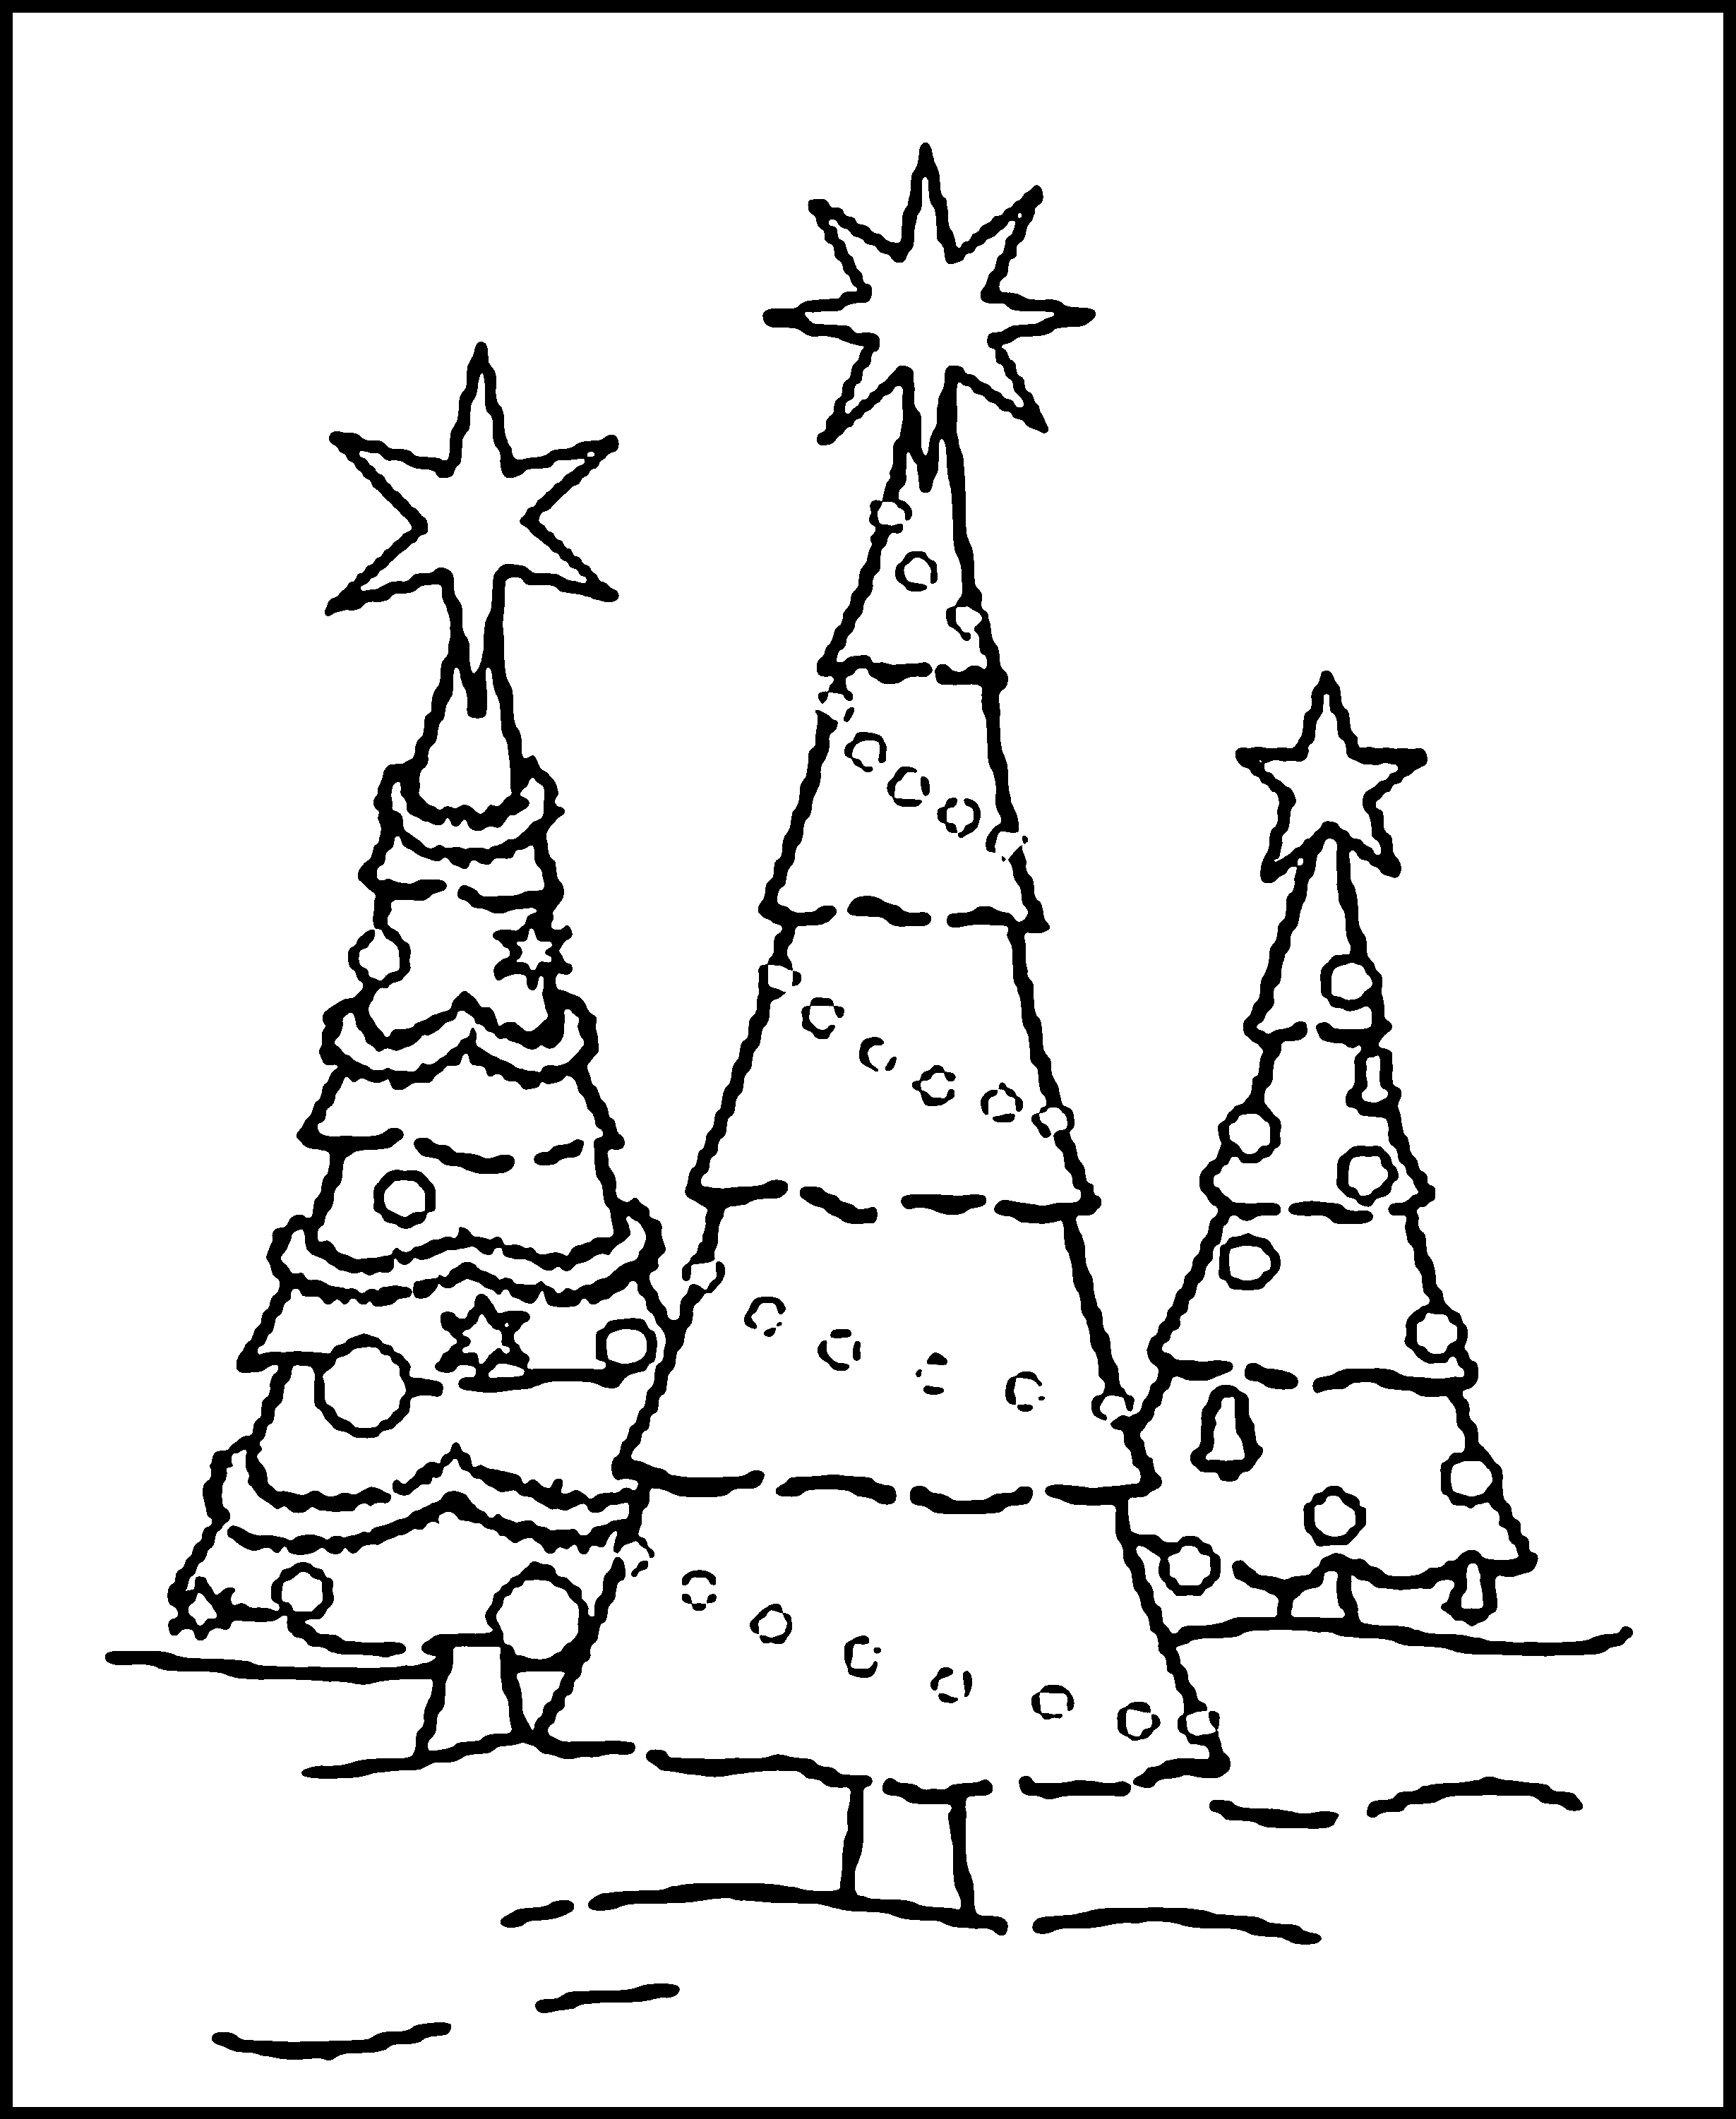 225-free-christmas-printables-you-need-to-decorate-delight-your